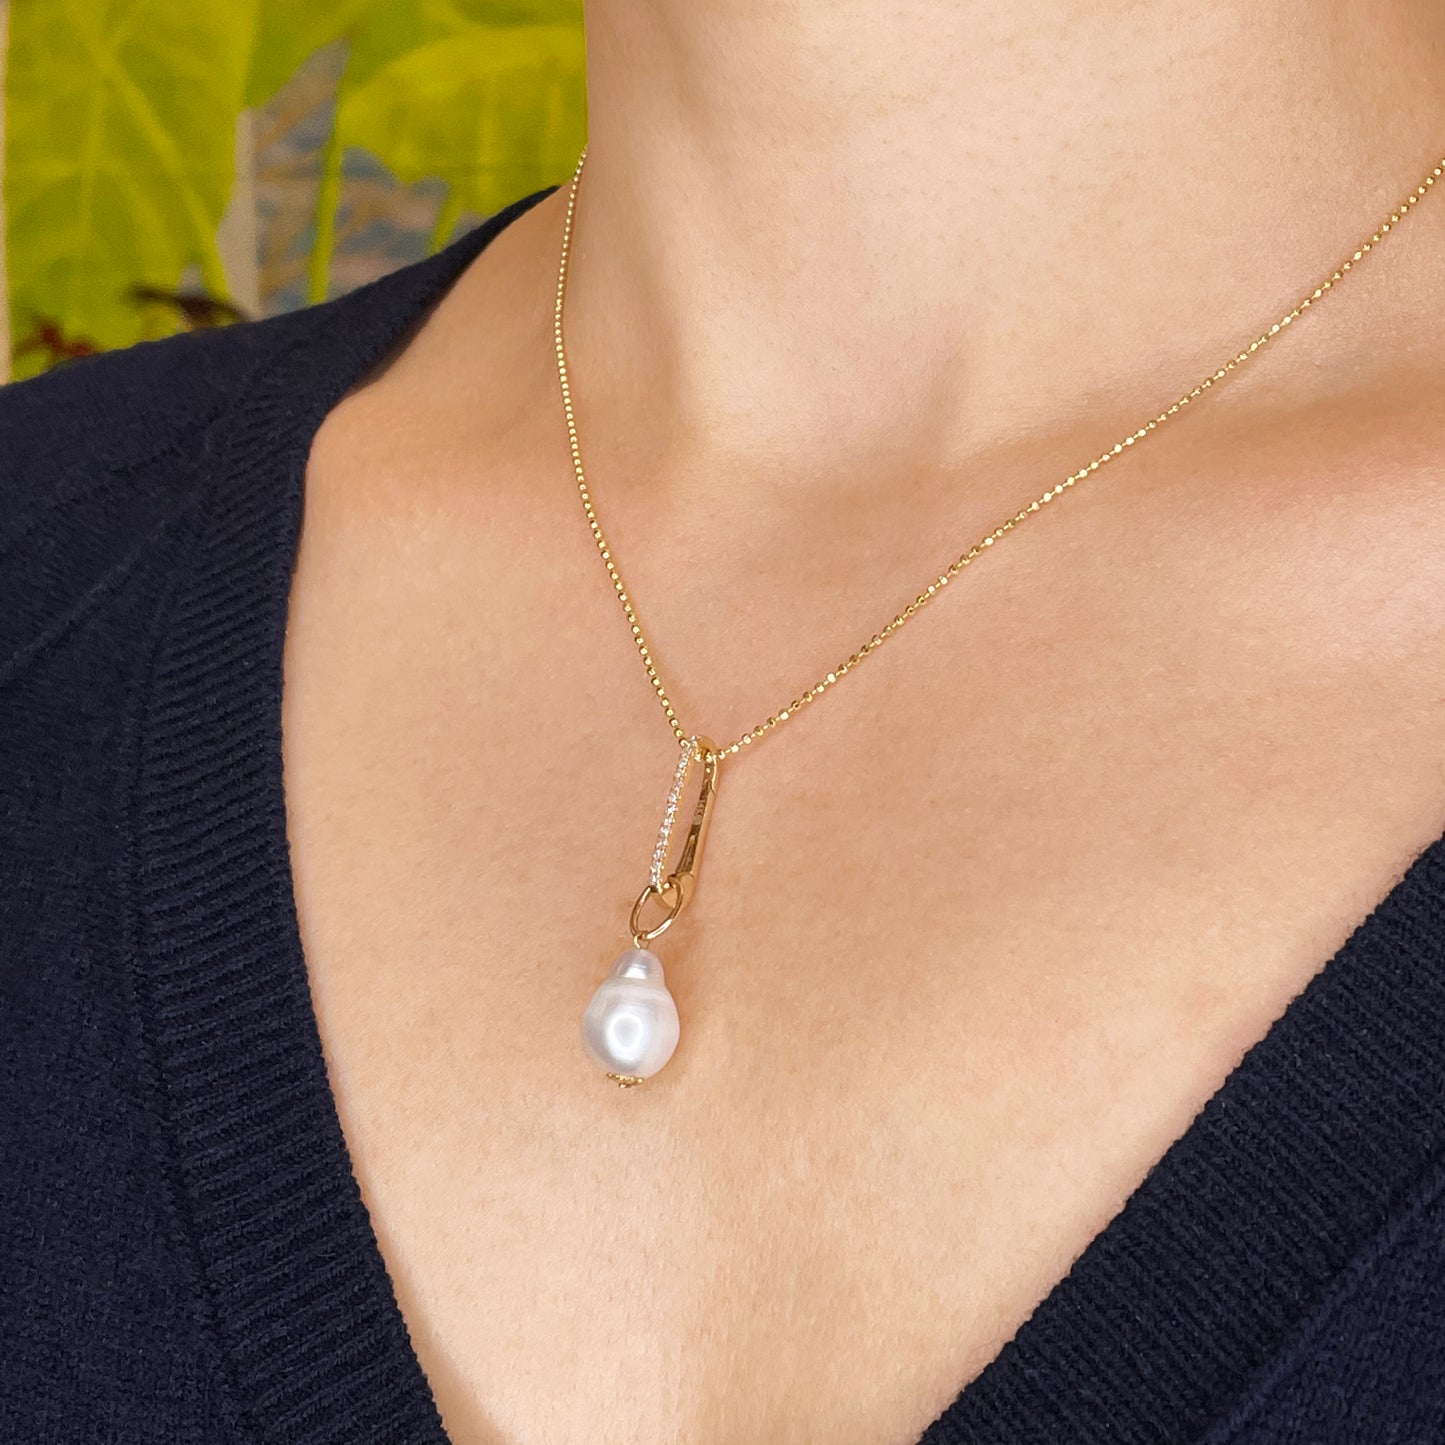 14k yellow gold oval push in charm with pave diamonds. Styled on a neck with a mini baroque pearl charm hanging from the diamond cut bead chain necklace. 